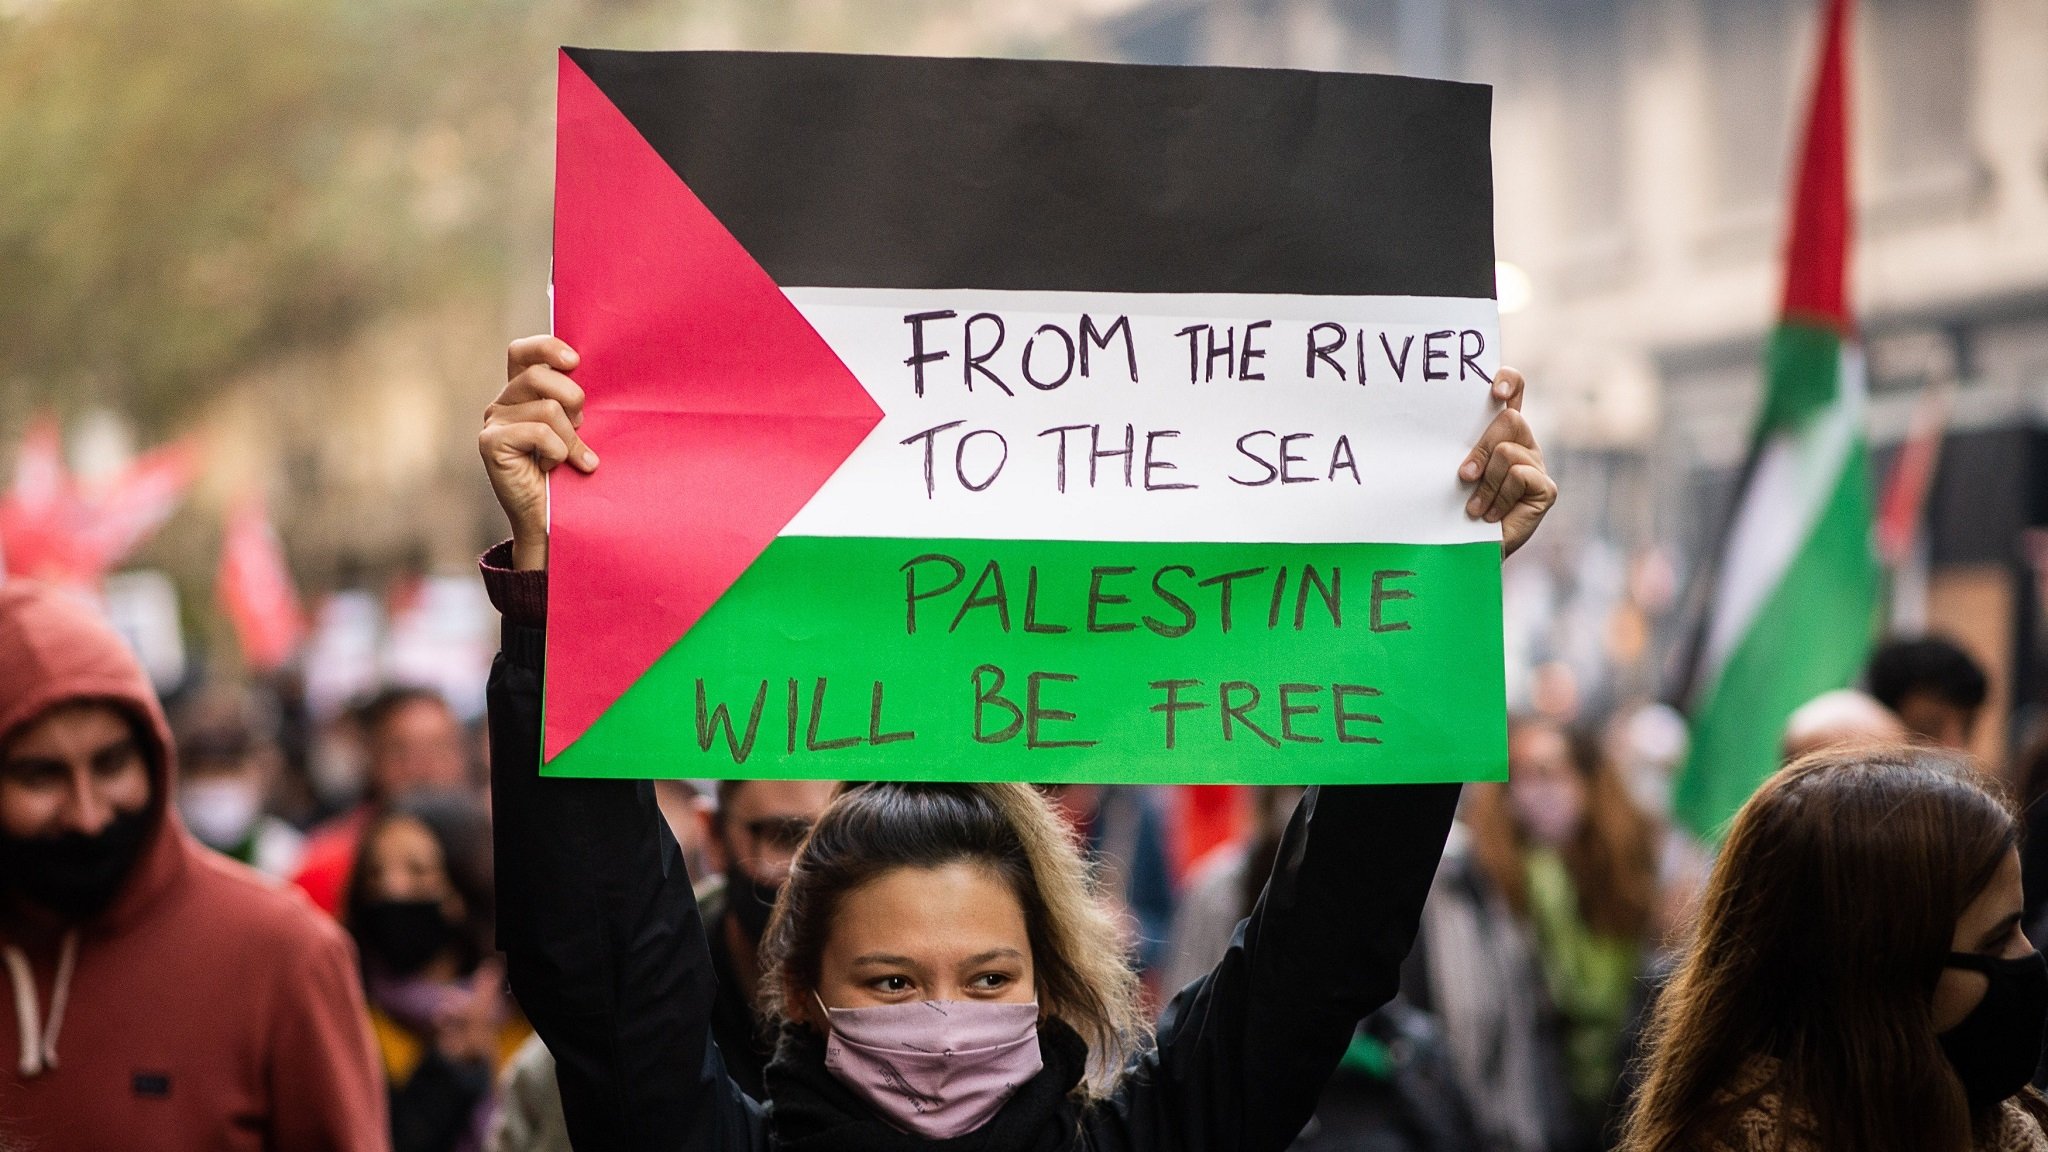 Demonstrantin hält ein Plakat hoch: "From the river to the sea, Palestine will be free"